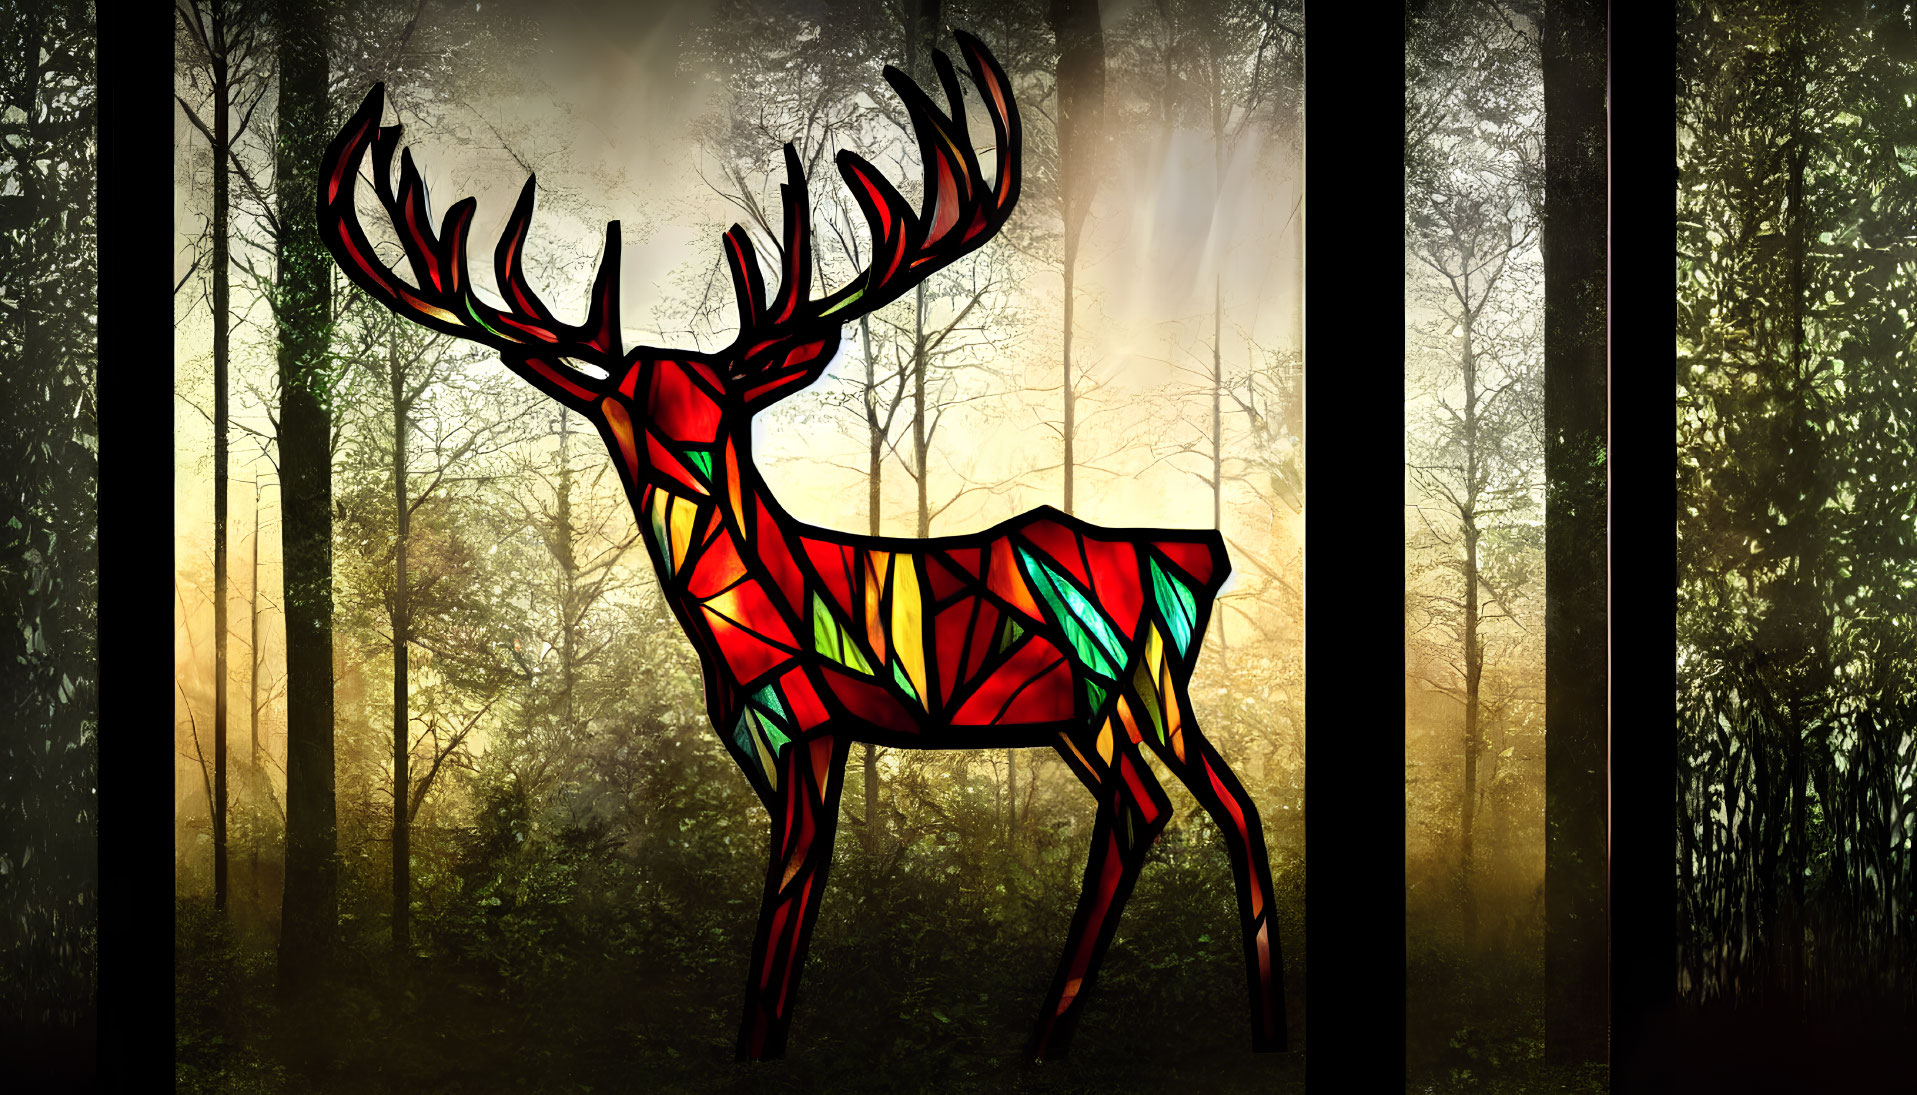 Colorful Stained Glass Deer in Misty Forest Setting